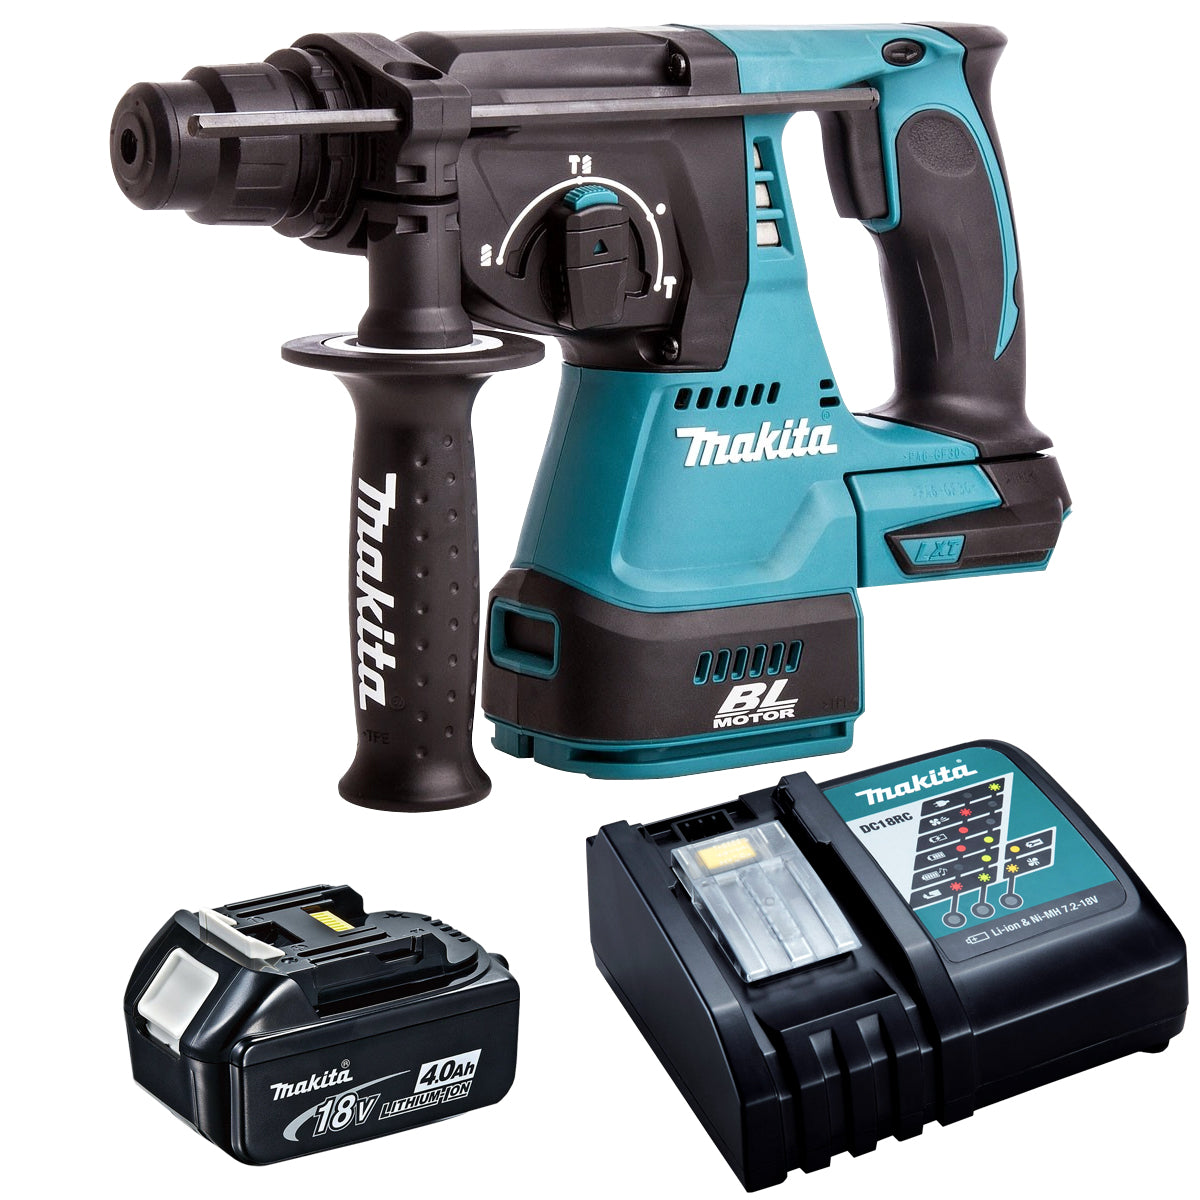 Makita DHR242Z 18V SDS+ Brushless Rotary Hammer Drill with 1 x 4.0Ah Battery & Charger